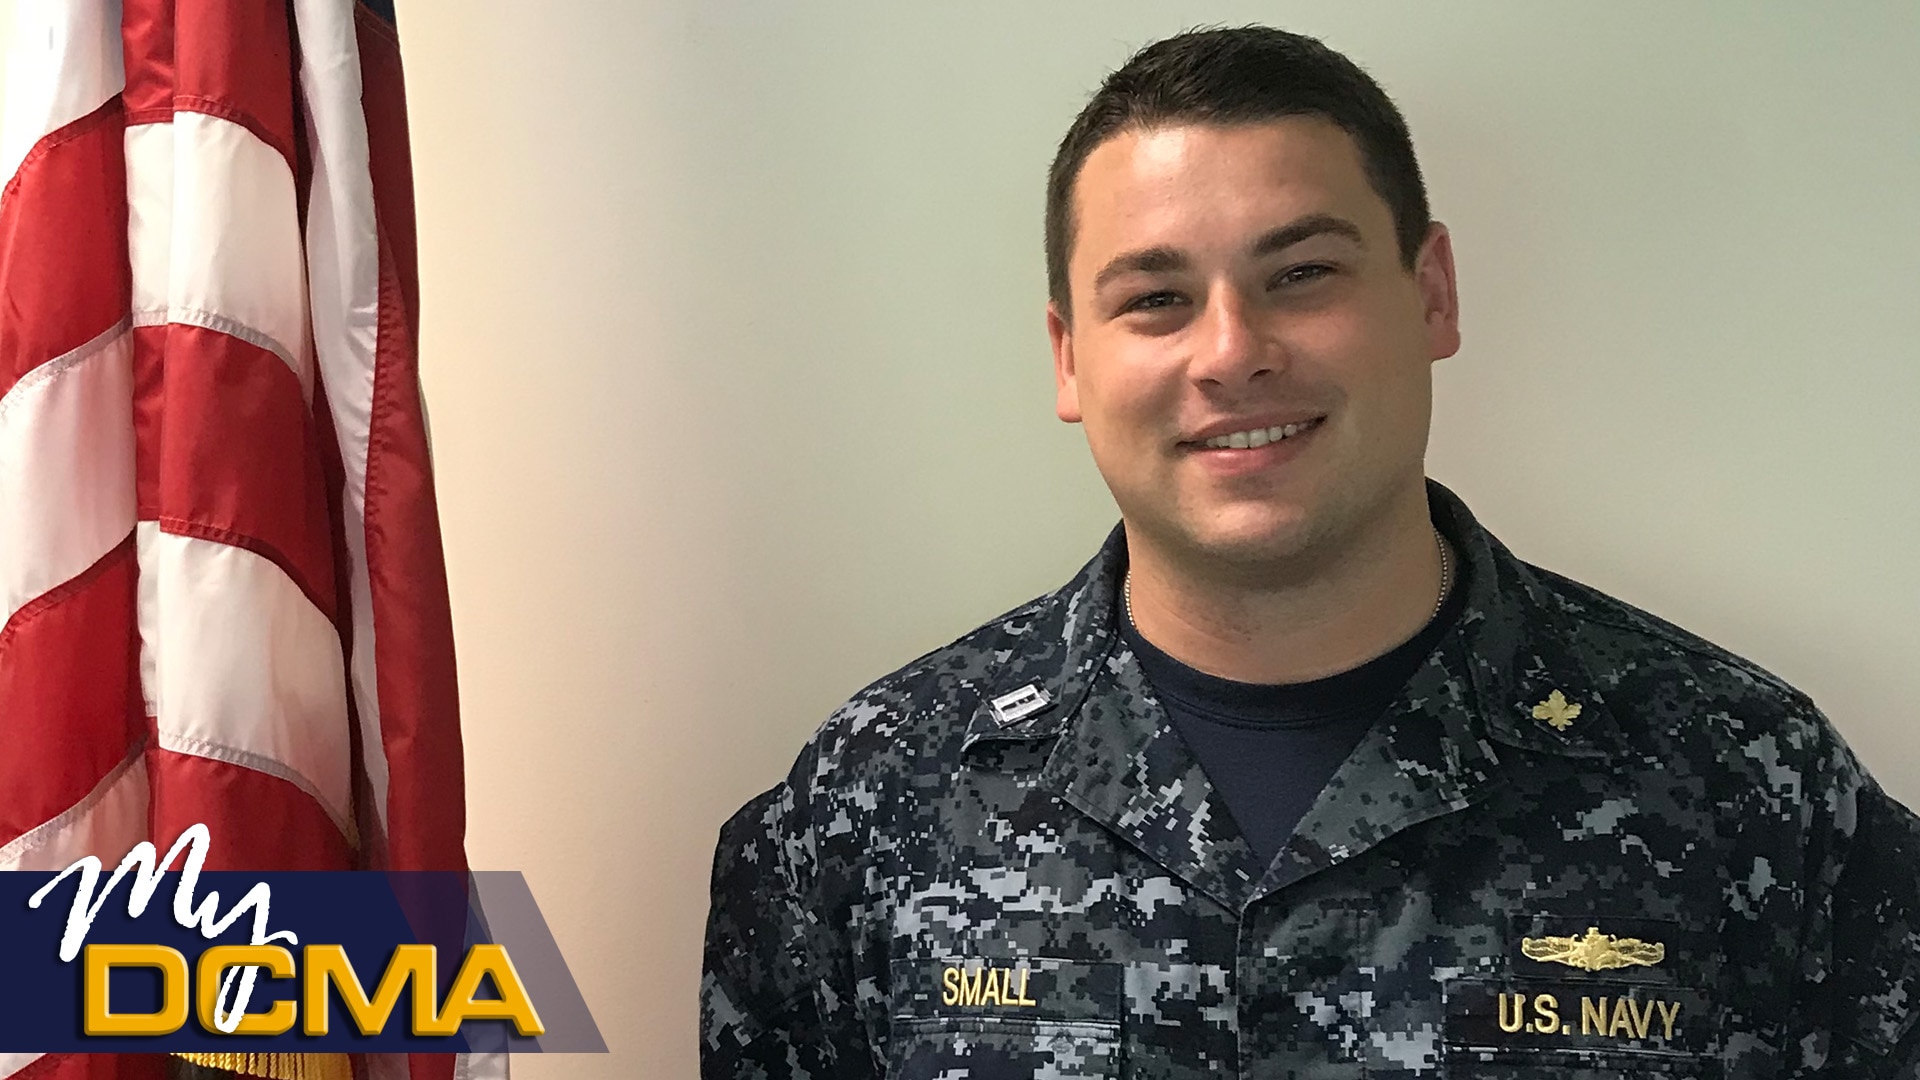 Navy Lt. Andrew Small is a contract administrator at Defense Contract Management Agency Lockheed Martin Moorestown in New Jersey. He has been a part of the DCMA team for a year and a half. (DCMA photo by Navy Lt. Jonathan Bradshaw)